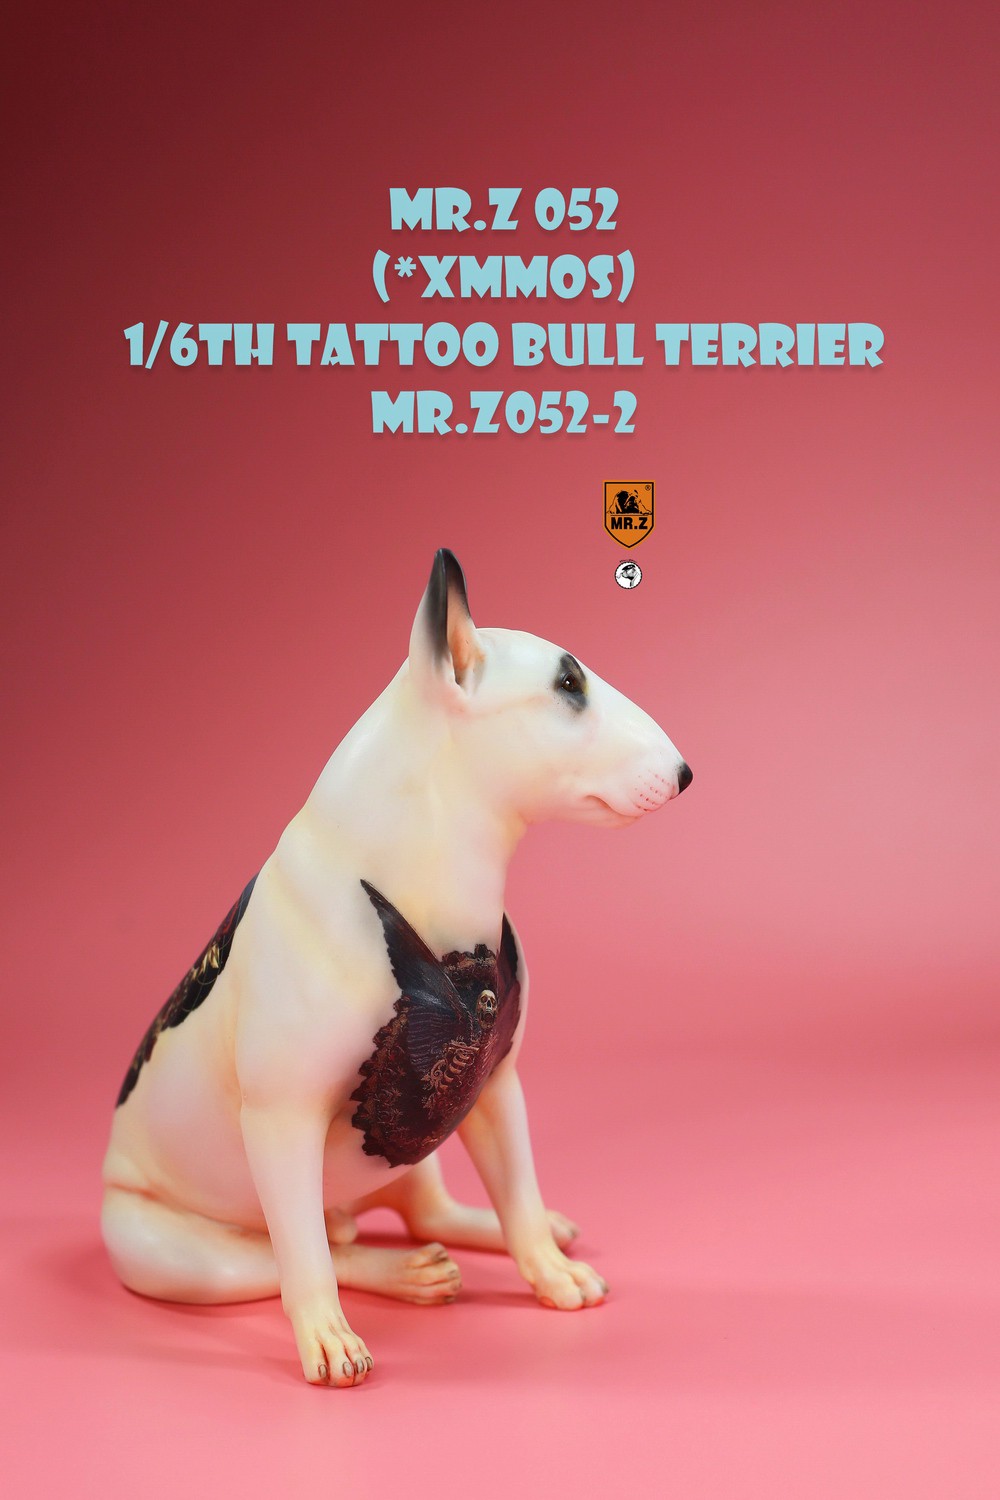 NEW PRODUCT: Mr.Z model: 1/6 simulation animal model No. 52-Tattoo Bull Terrier (all 5 colors) 22283310